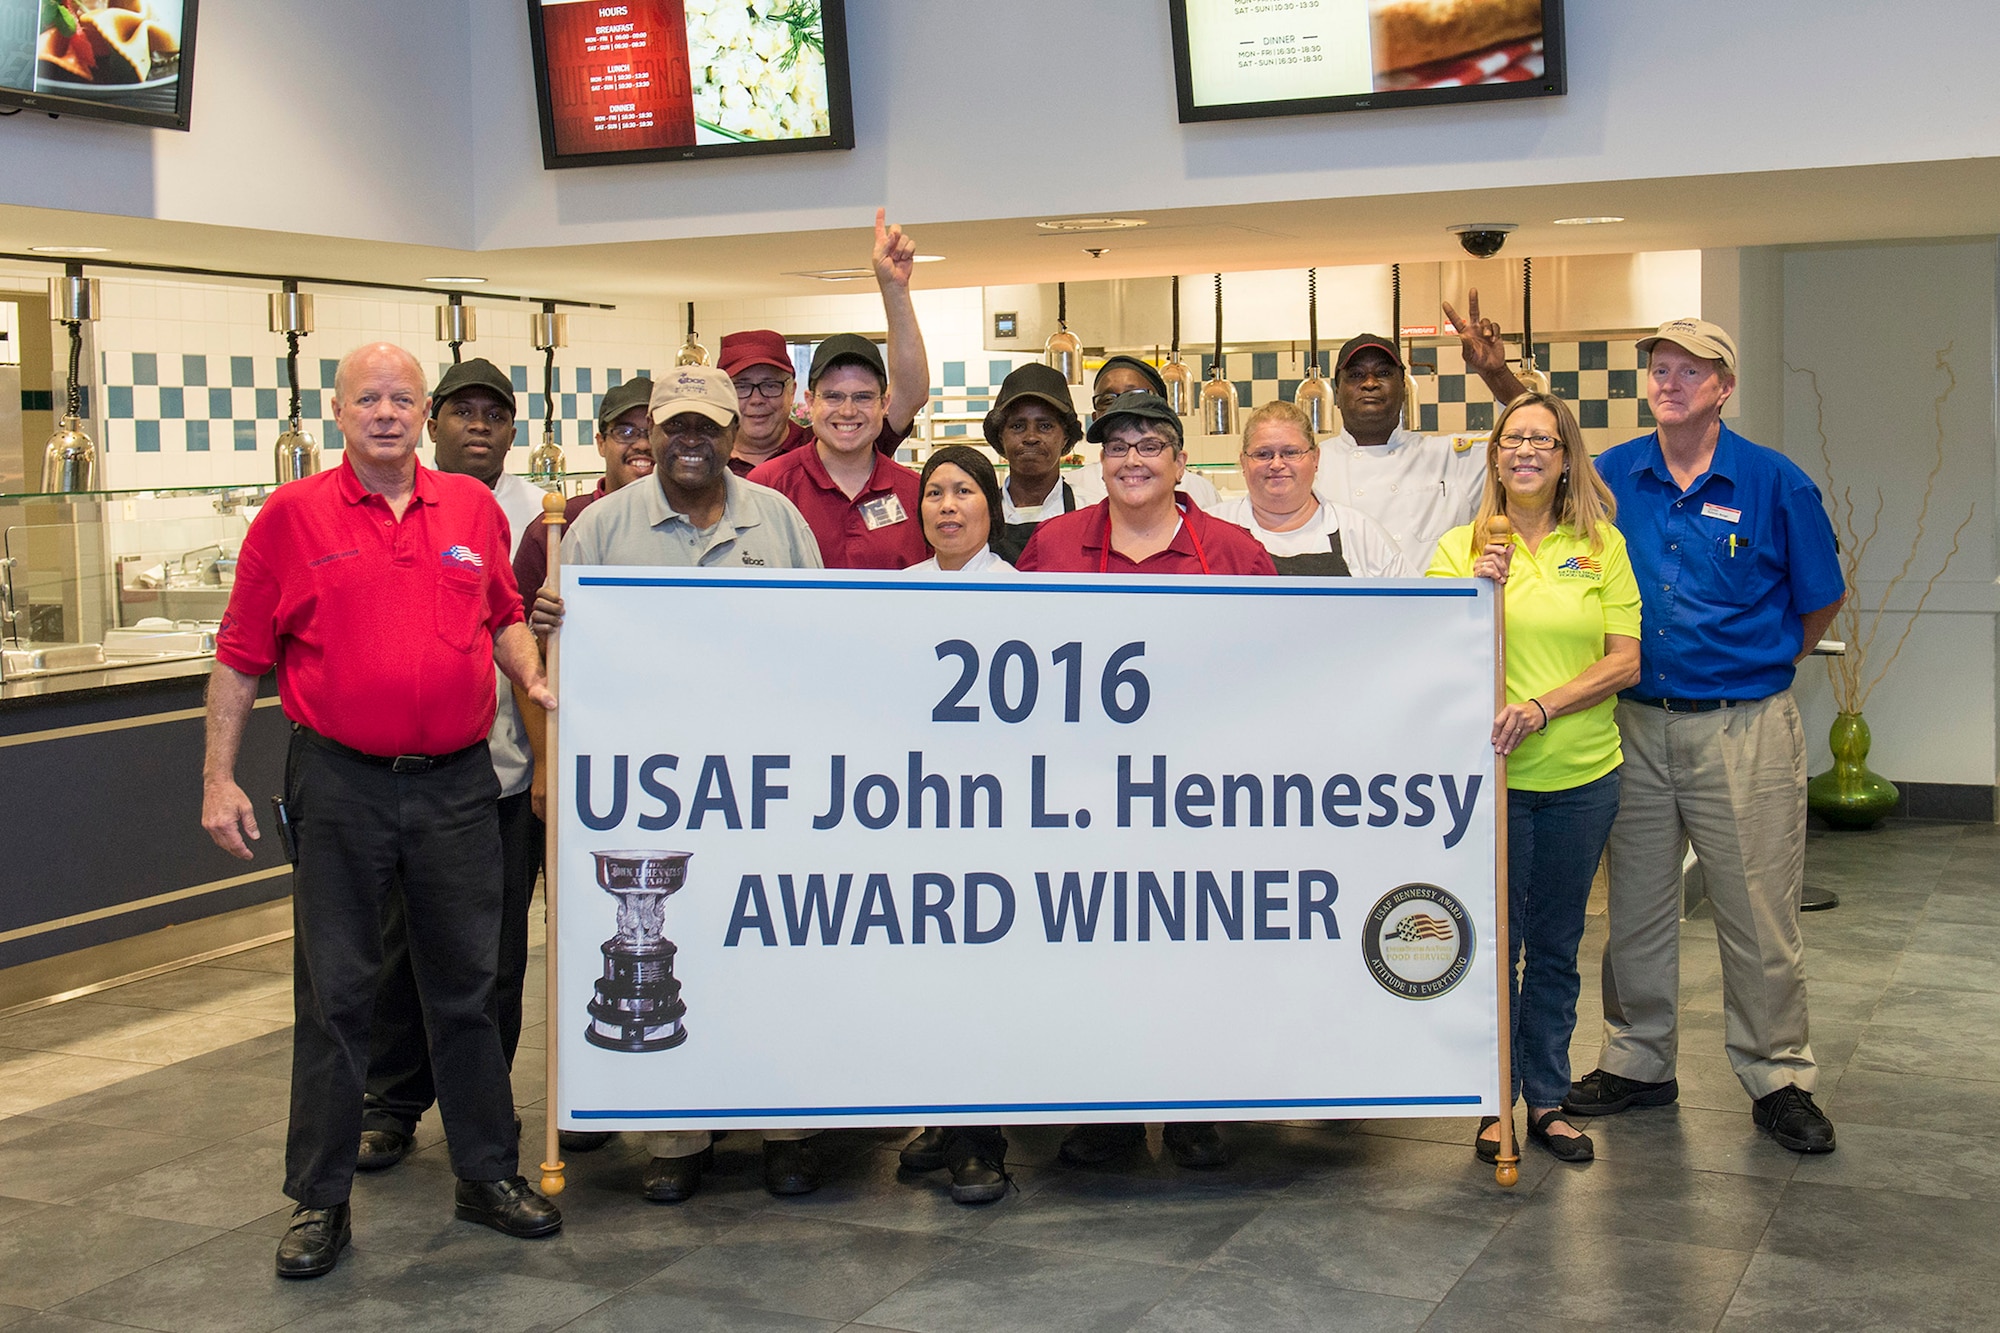 The Air Force Services Agency has named the Riverside Dining Facility at Patrick Air Force Base the winner of the coveted Hennessy Trophy for the East Region in 2016, on March 21, 2016. The Hennessy Award is presented to the Air Force Installation with the best Food Service Program in the Air Force. (U.S. Air Force photo/Matthew Jurgens) (Released)  